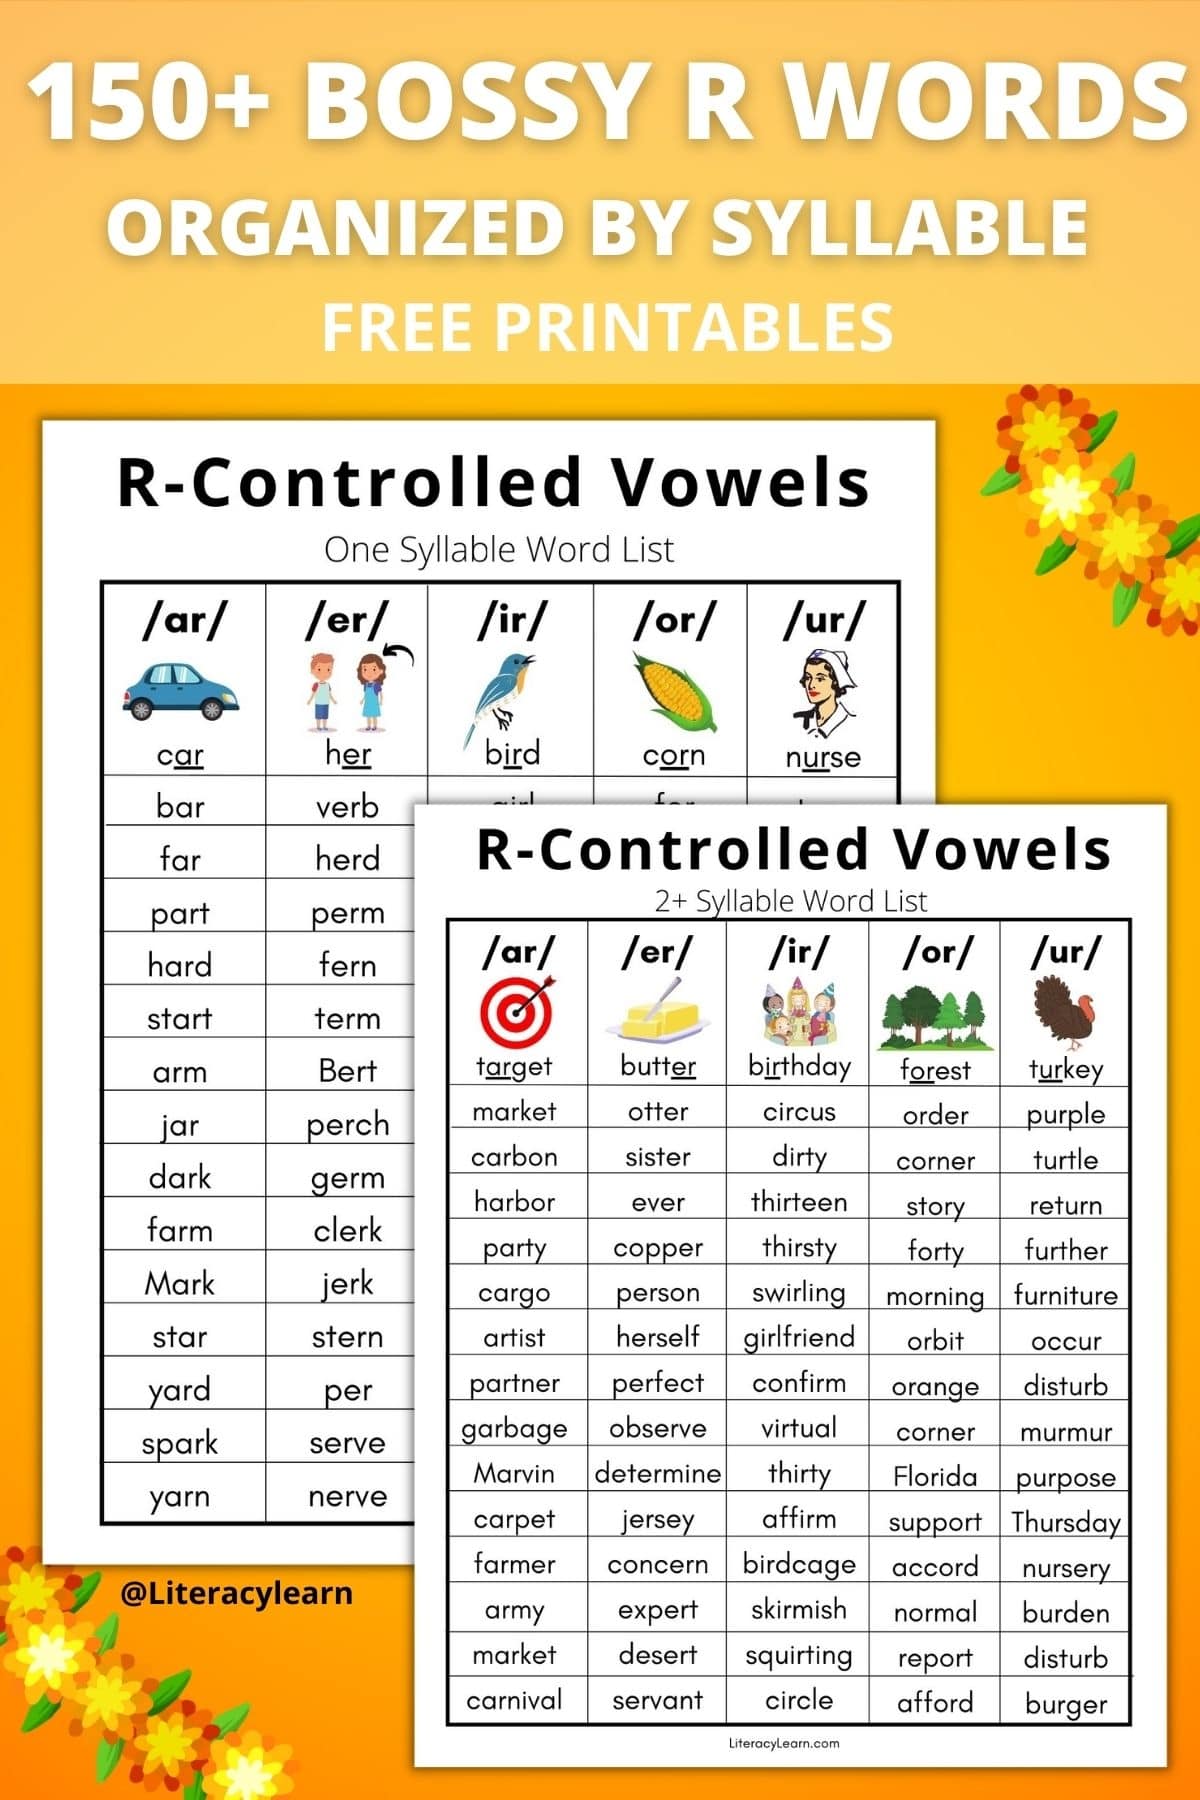 An orange Pinterest image showing 150+ Bossy R Words with two worksheets displayed.